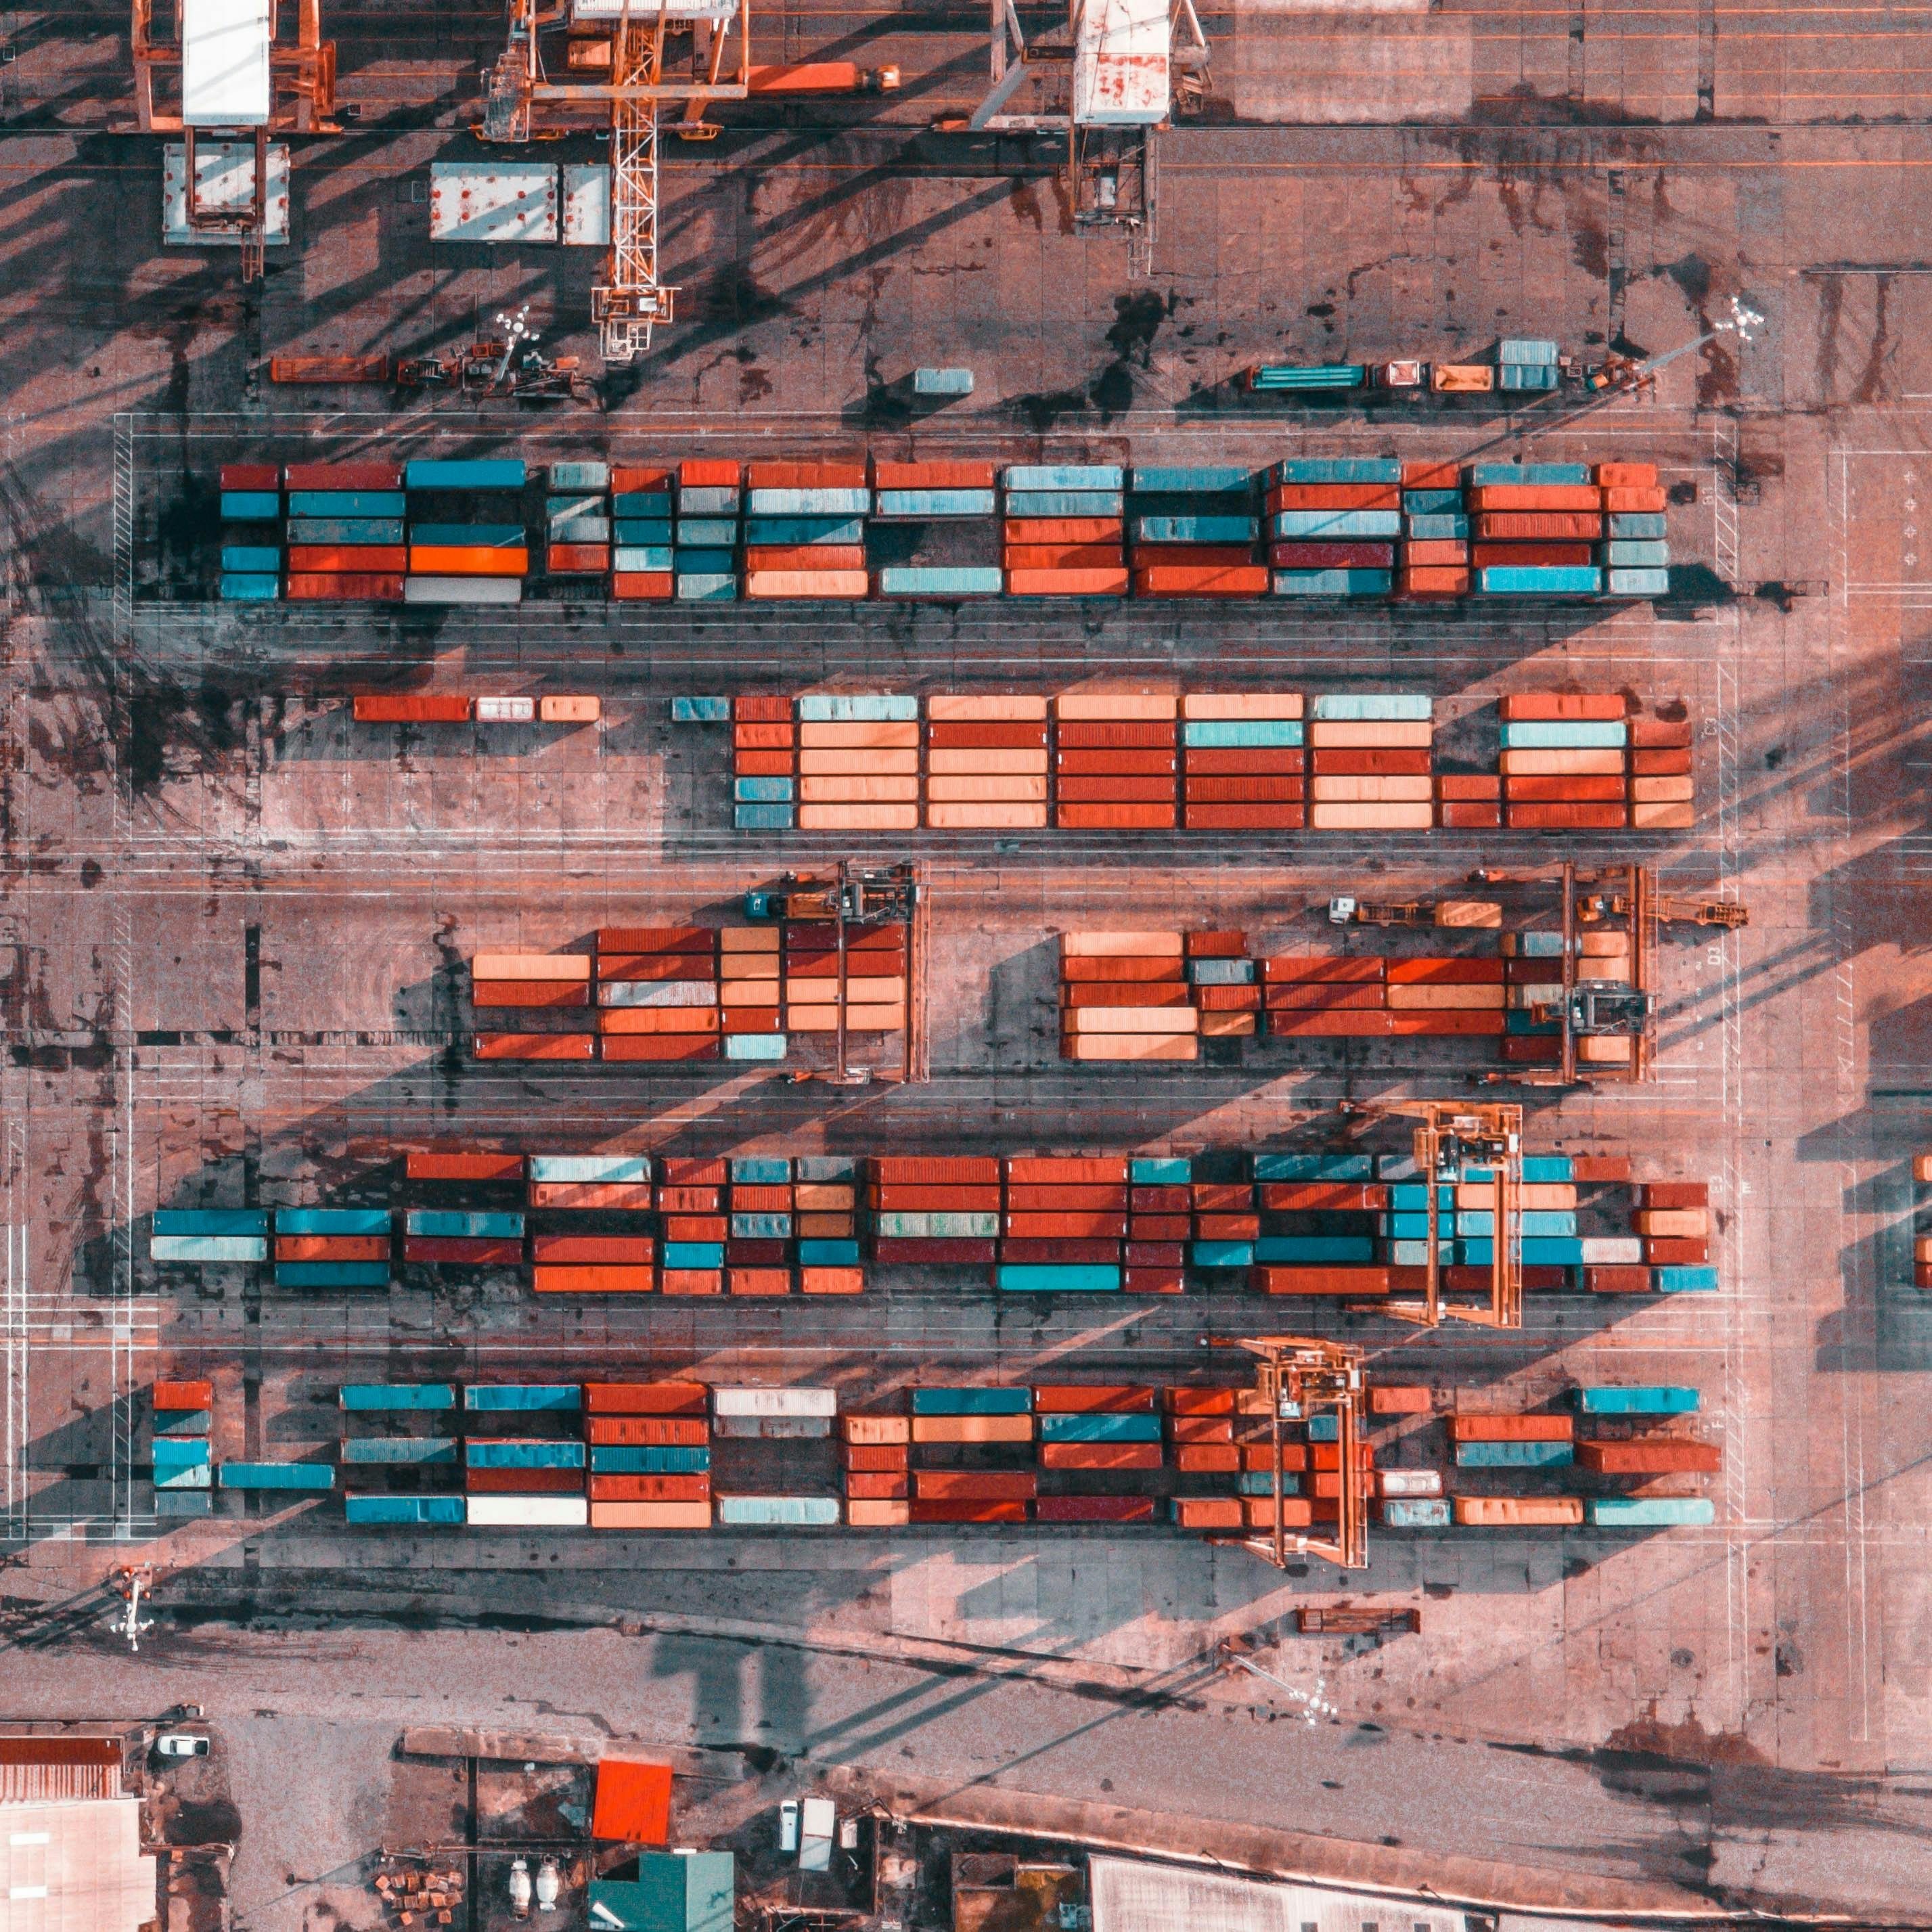 Photograph of shipping containers in a dock